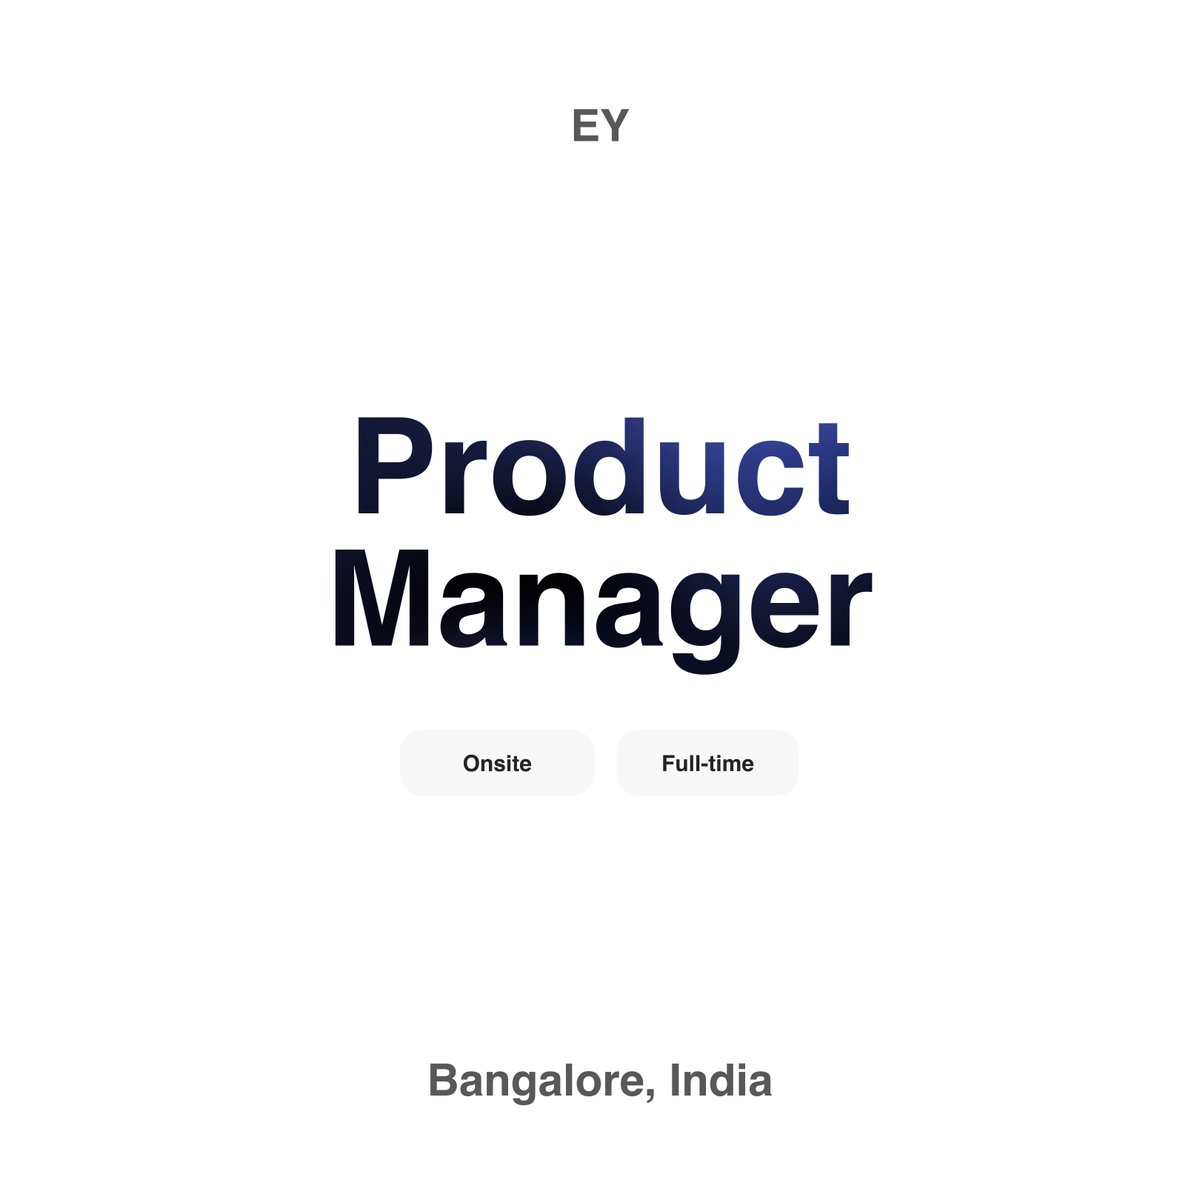 Ready to lead innovation? EY is hiring a Product Manager to shape the future of their organization. Join now and be a part of their success story!
Link in bio.

#ProductManager #TechInnovation #EYHiring